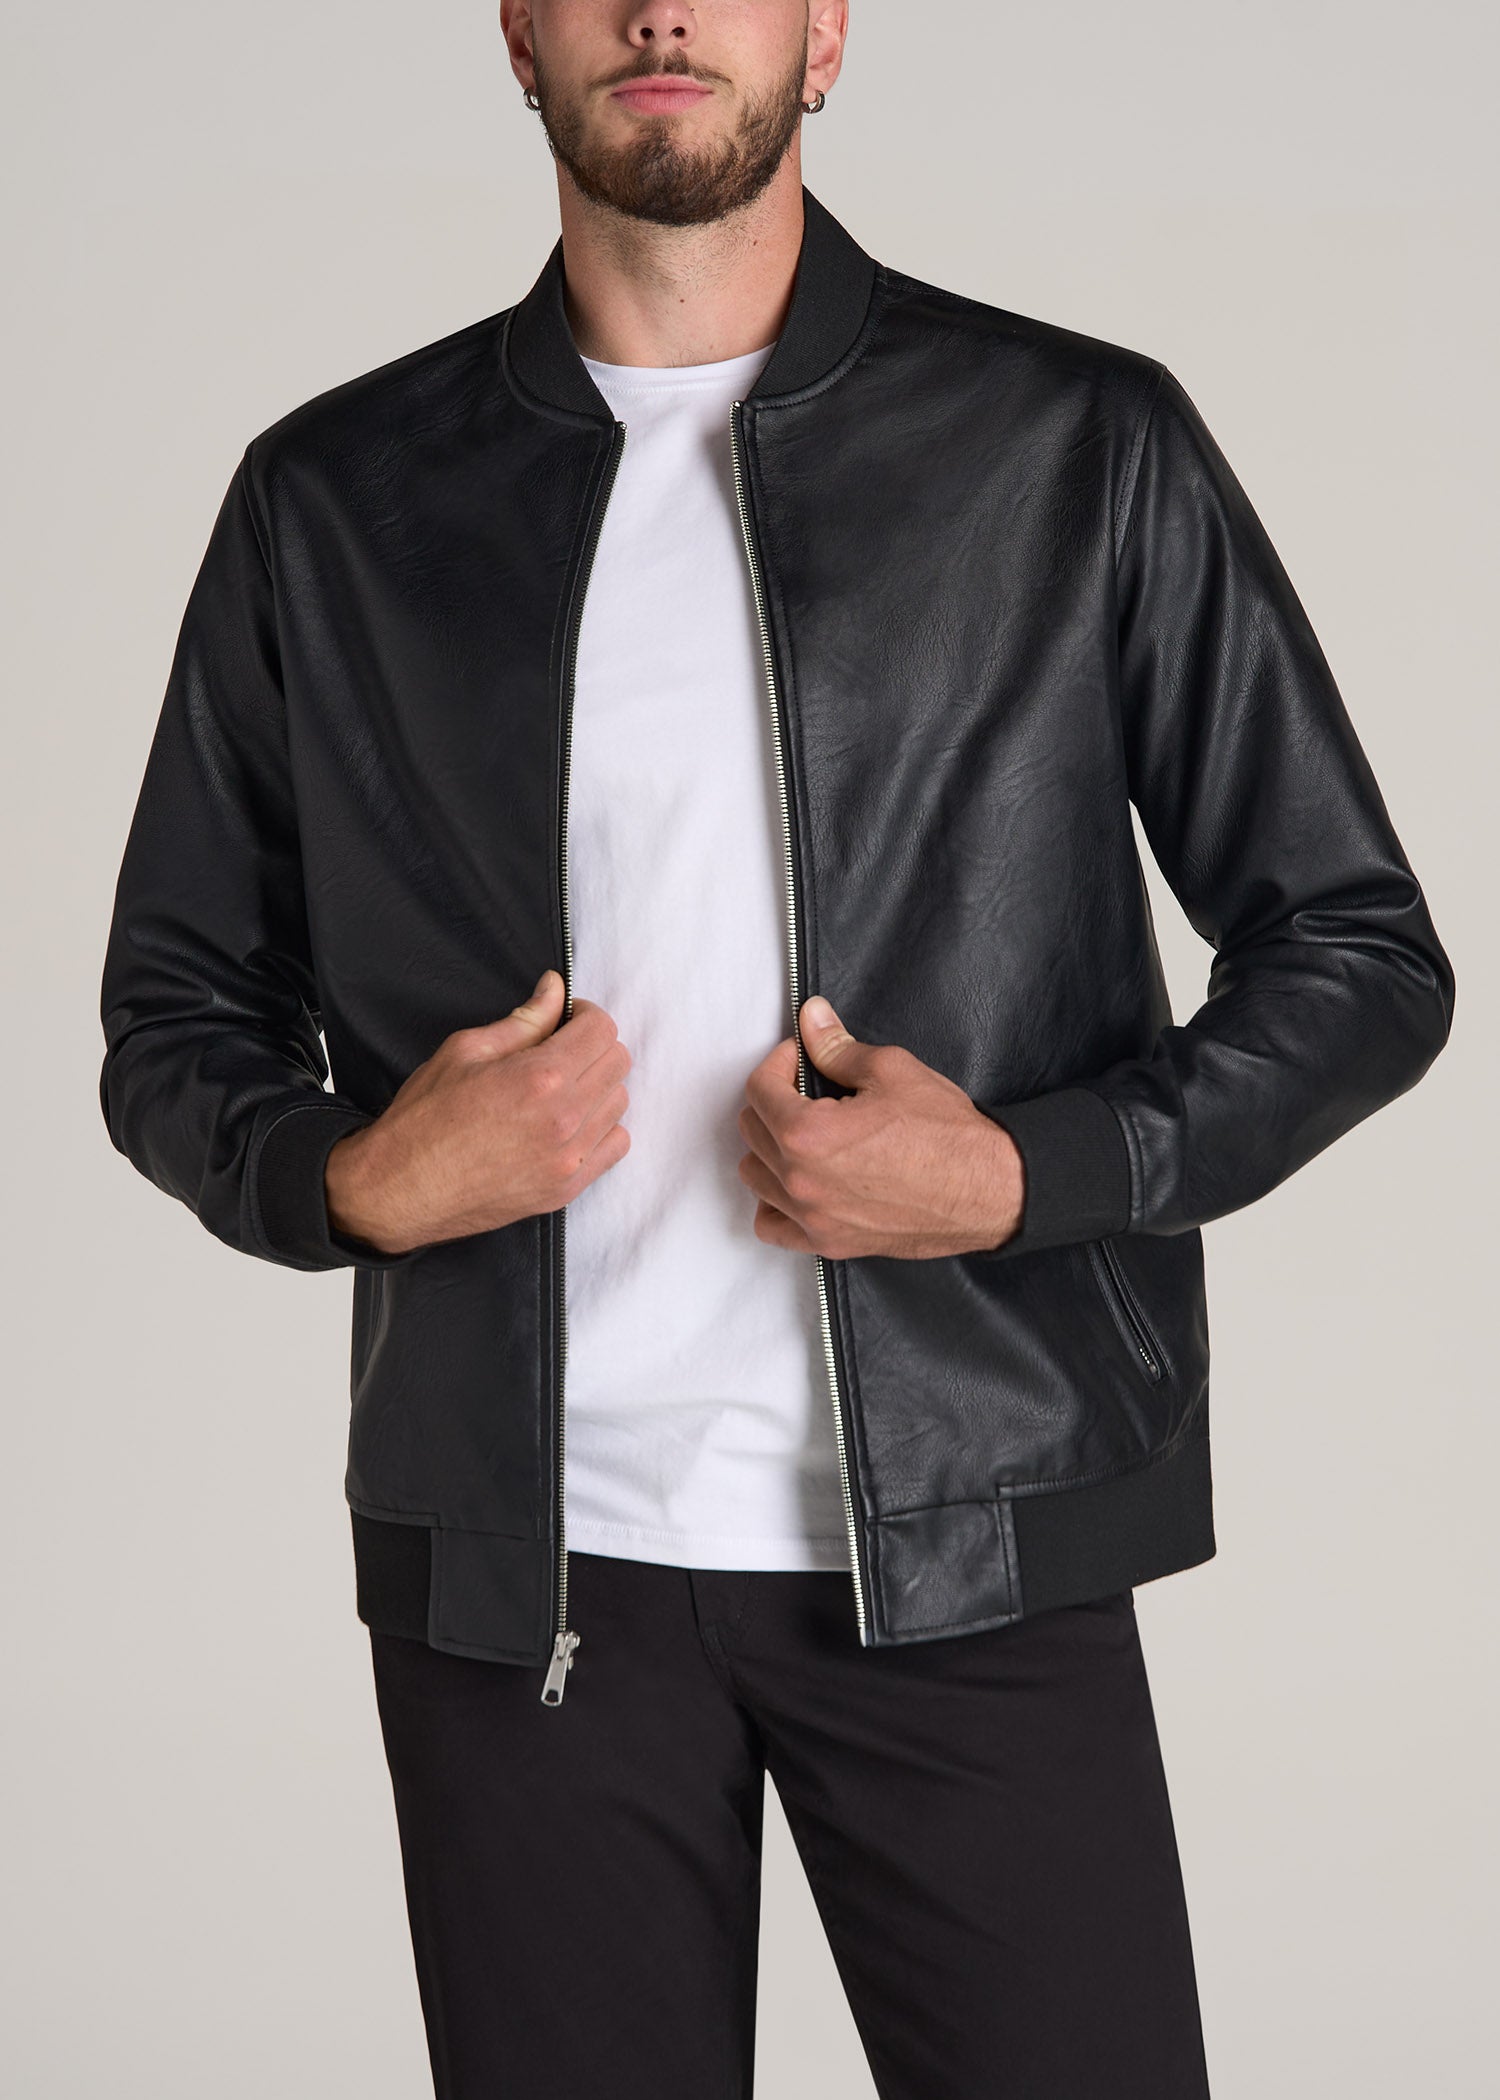 Tall man wearing American Tall's Faux Leather Bomber Jacket for Tall Men in Black.